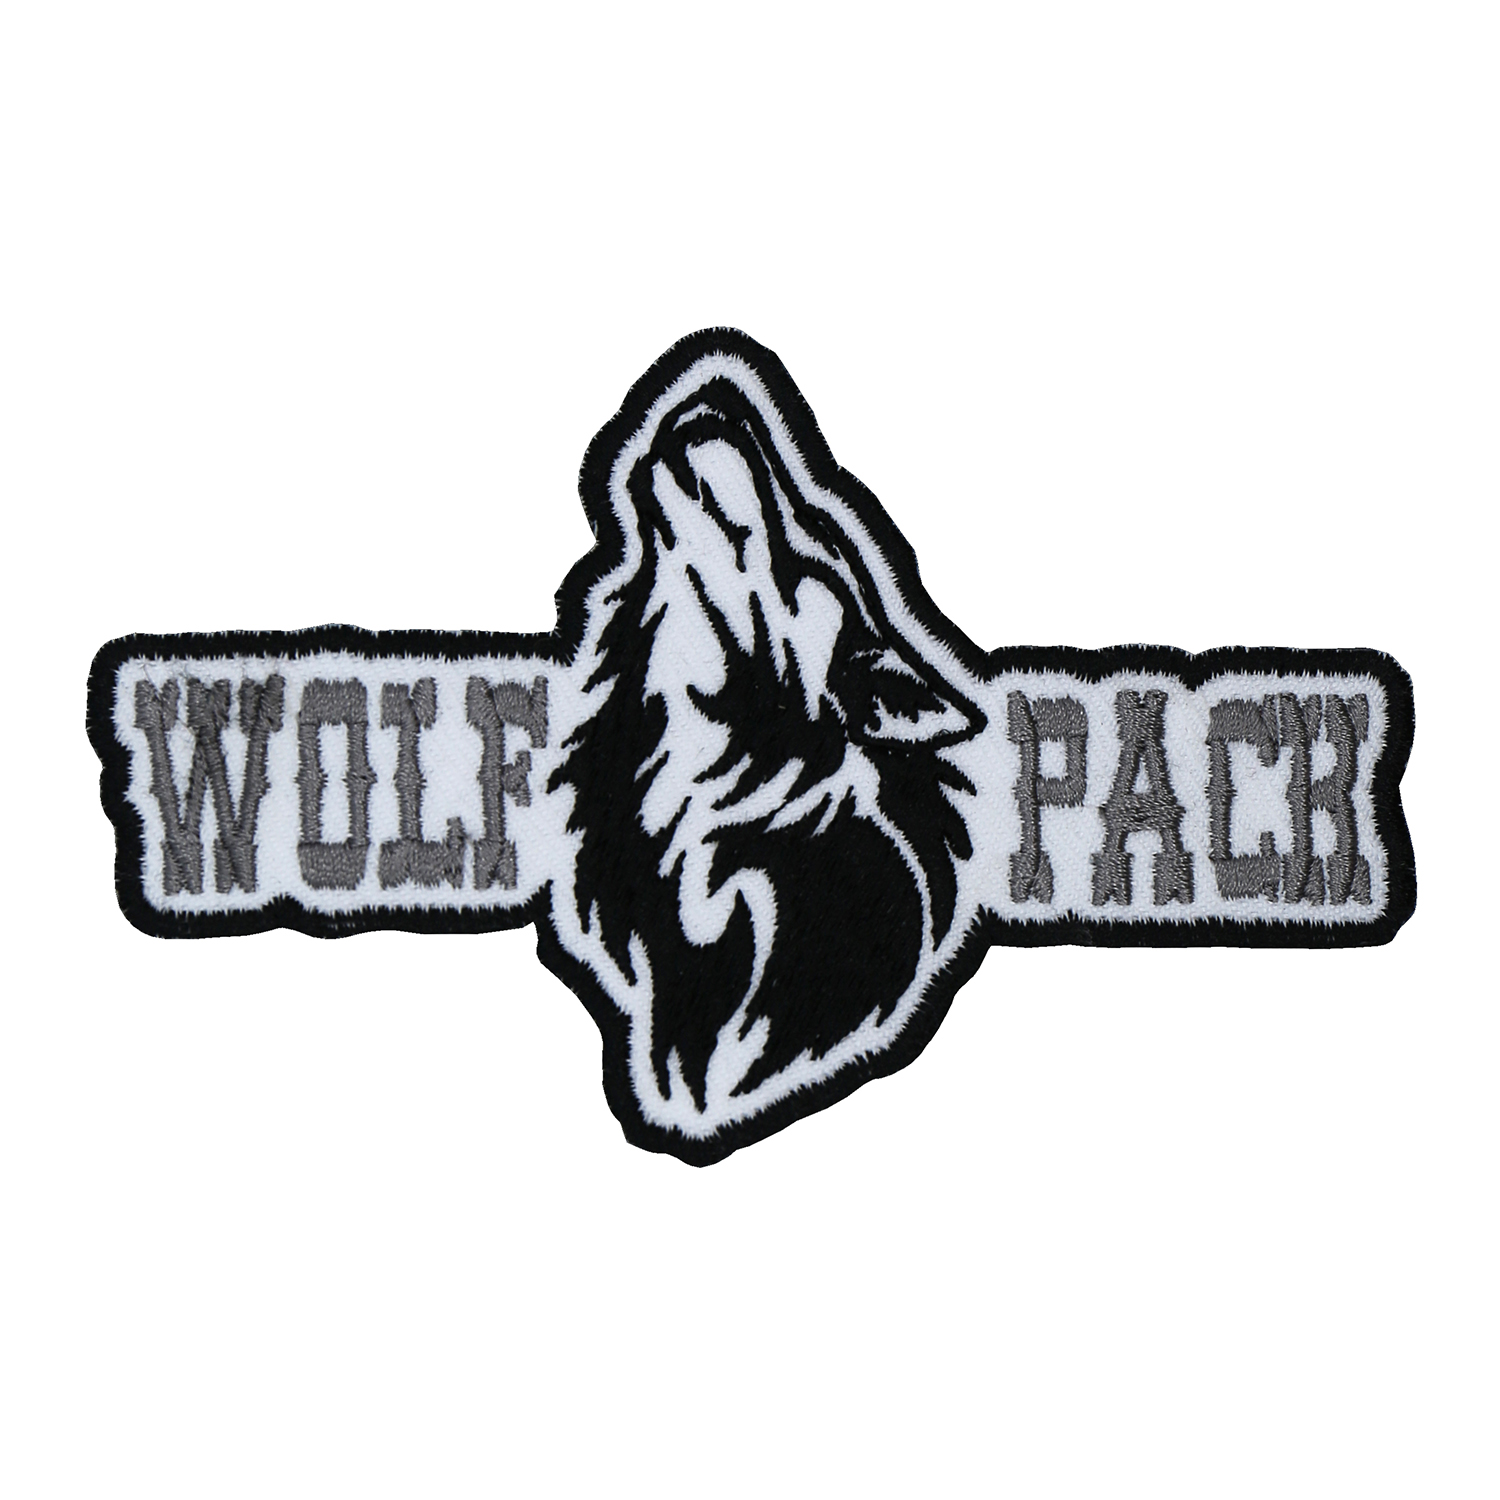 Wolf Pack Motorcycle Club Embroidered Biker Patch